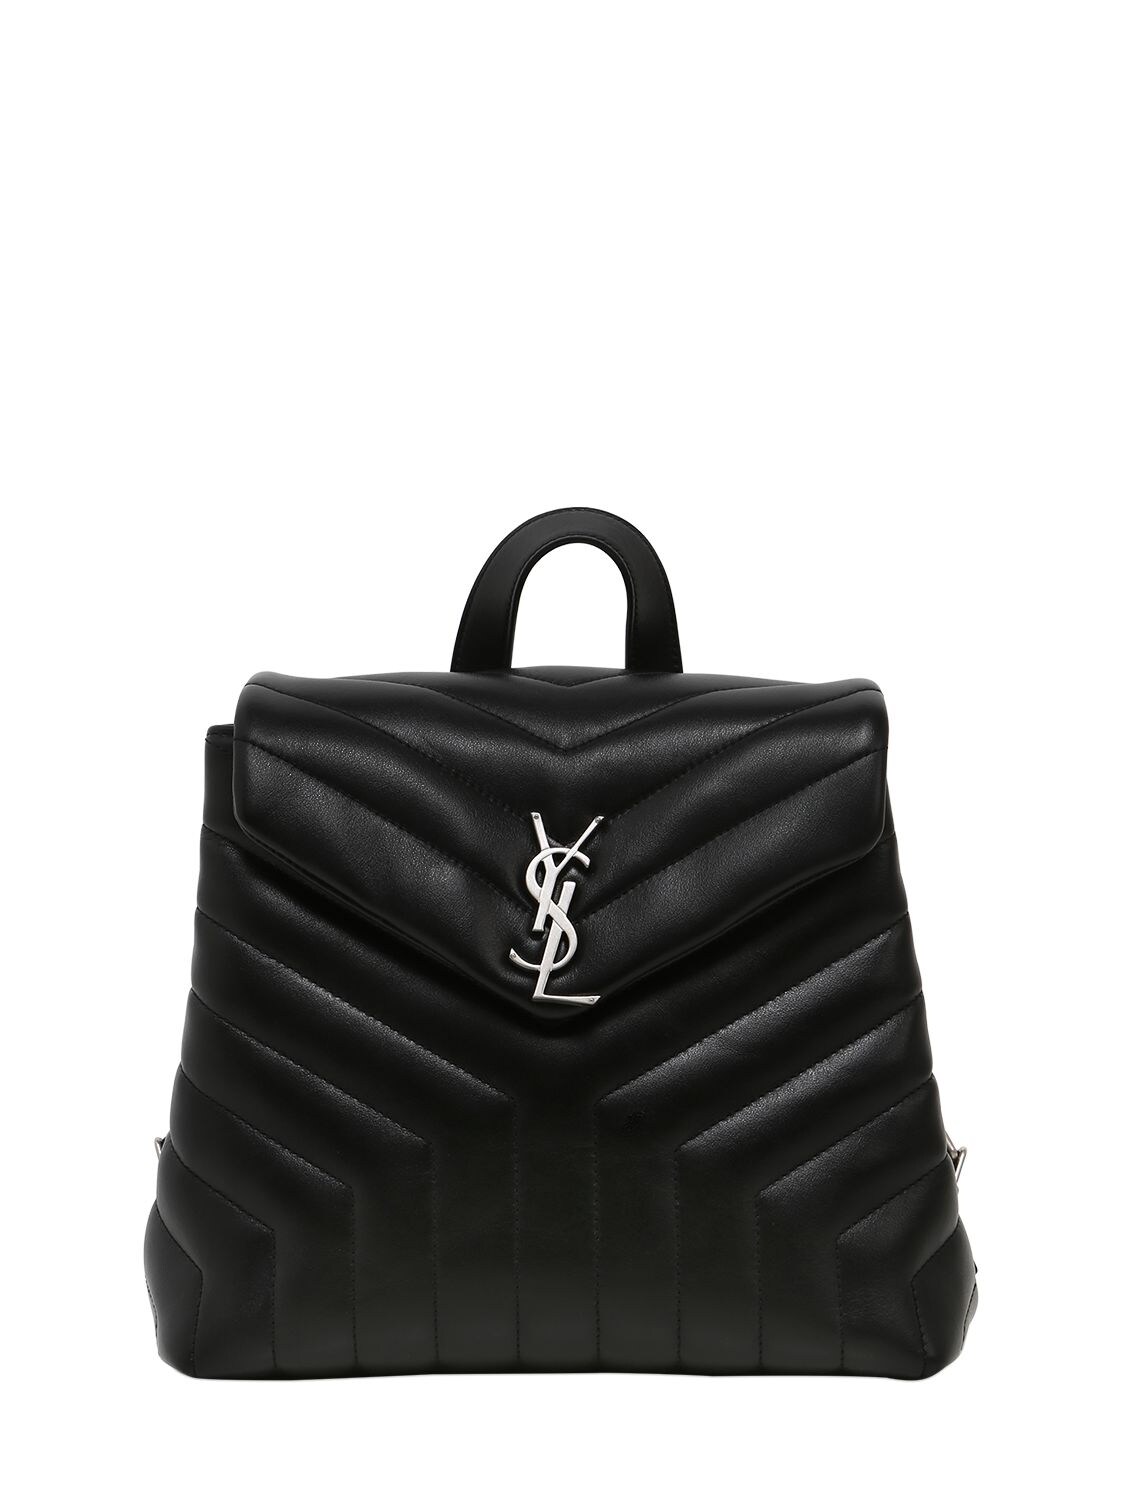 SMALL LOULOU MONOGRAM LEATHER BACKPACK